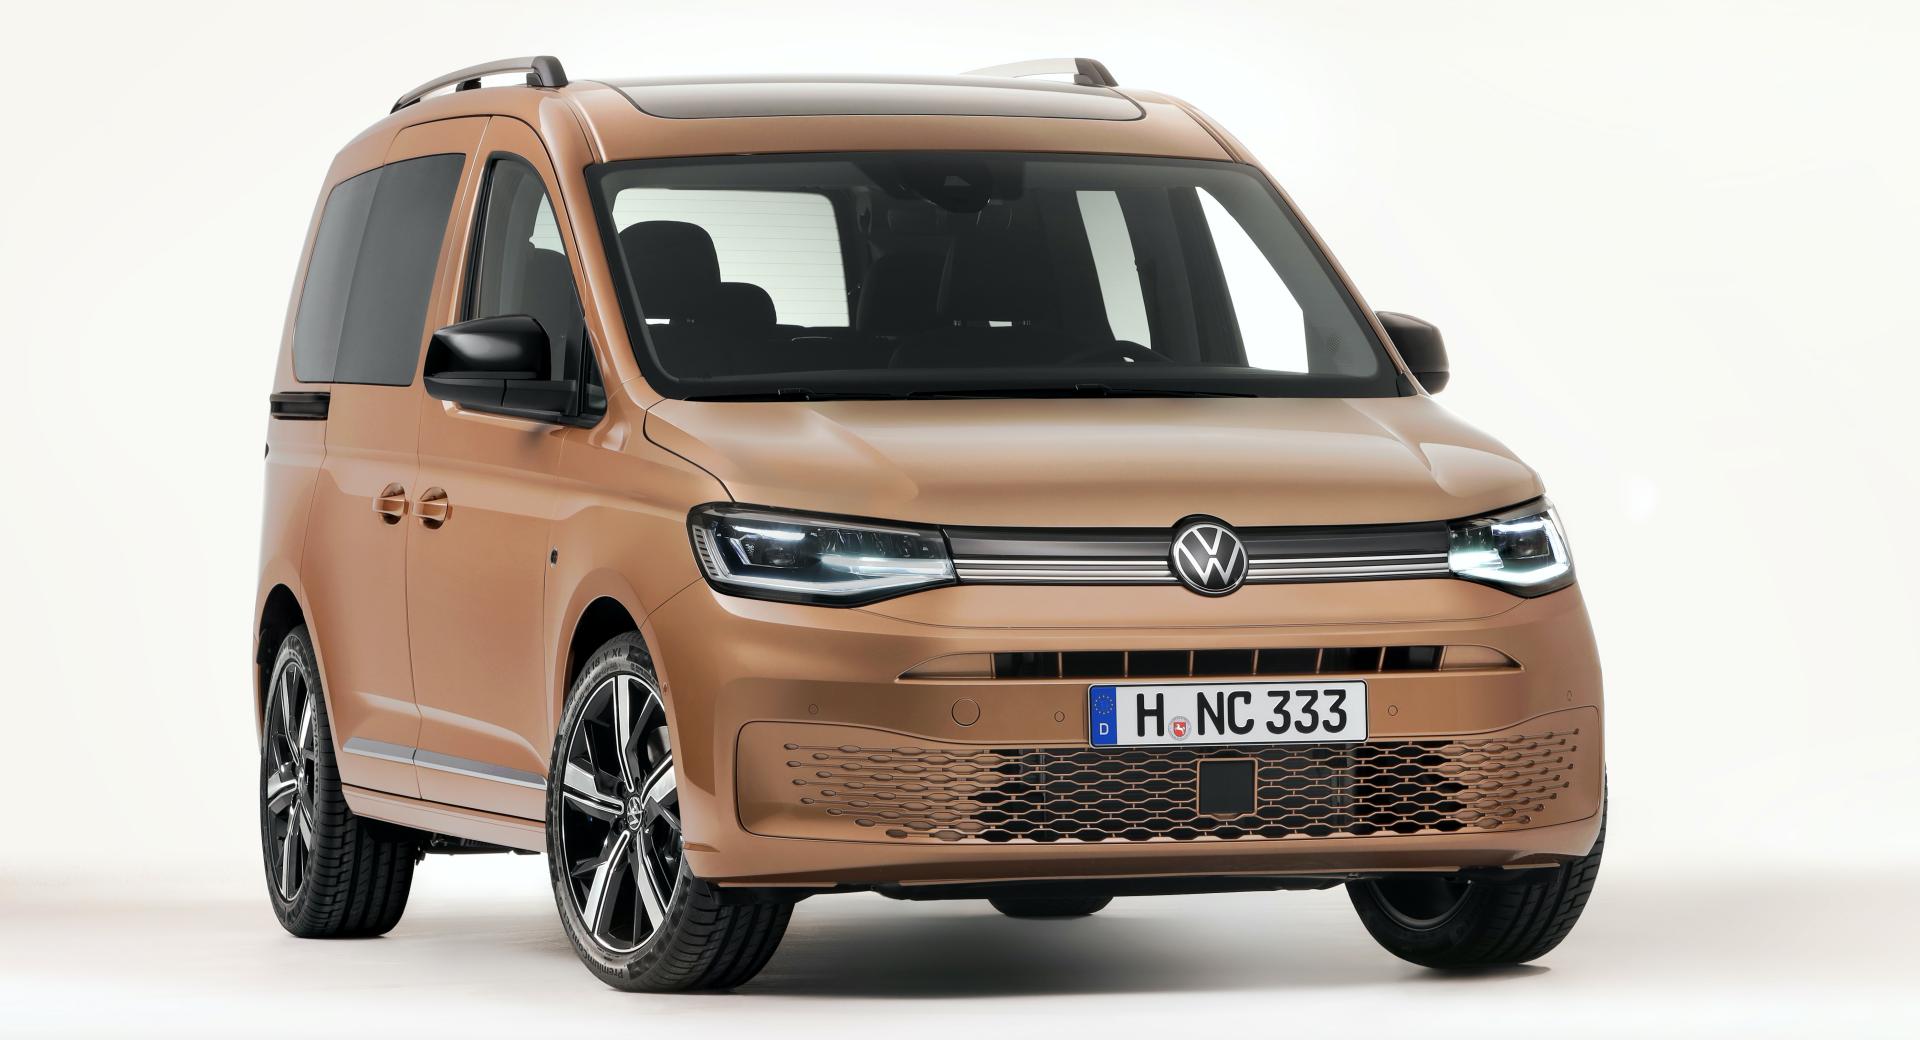 new 2021 vw caddy wraps mqb underpinnings in evolutionary